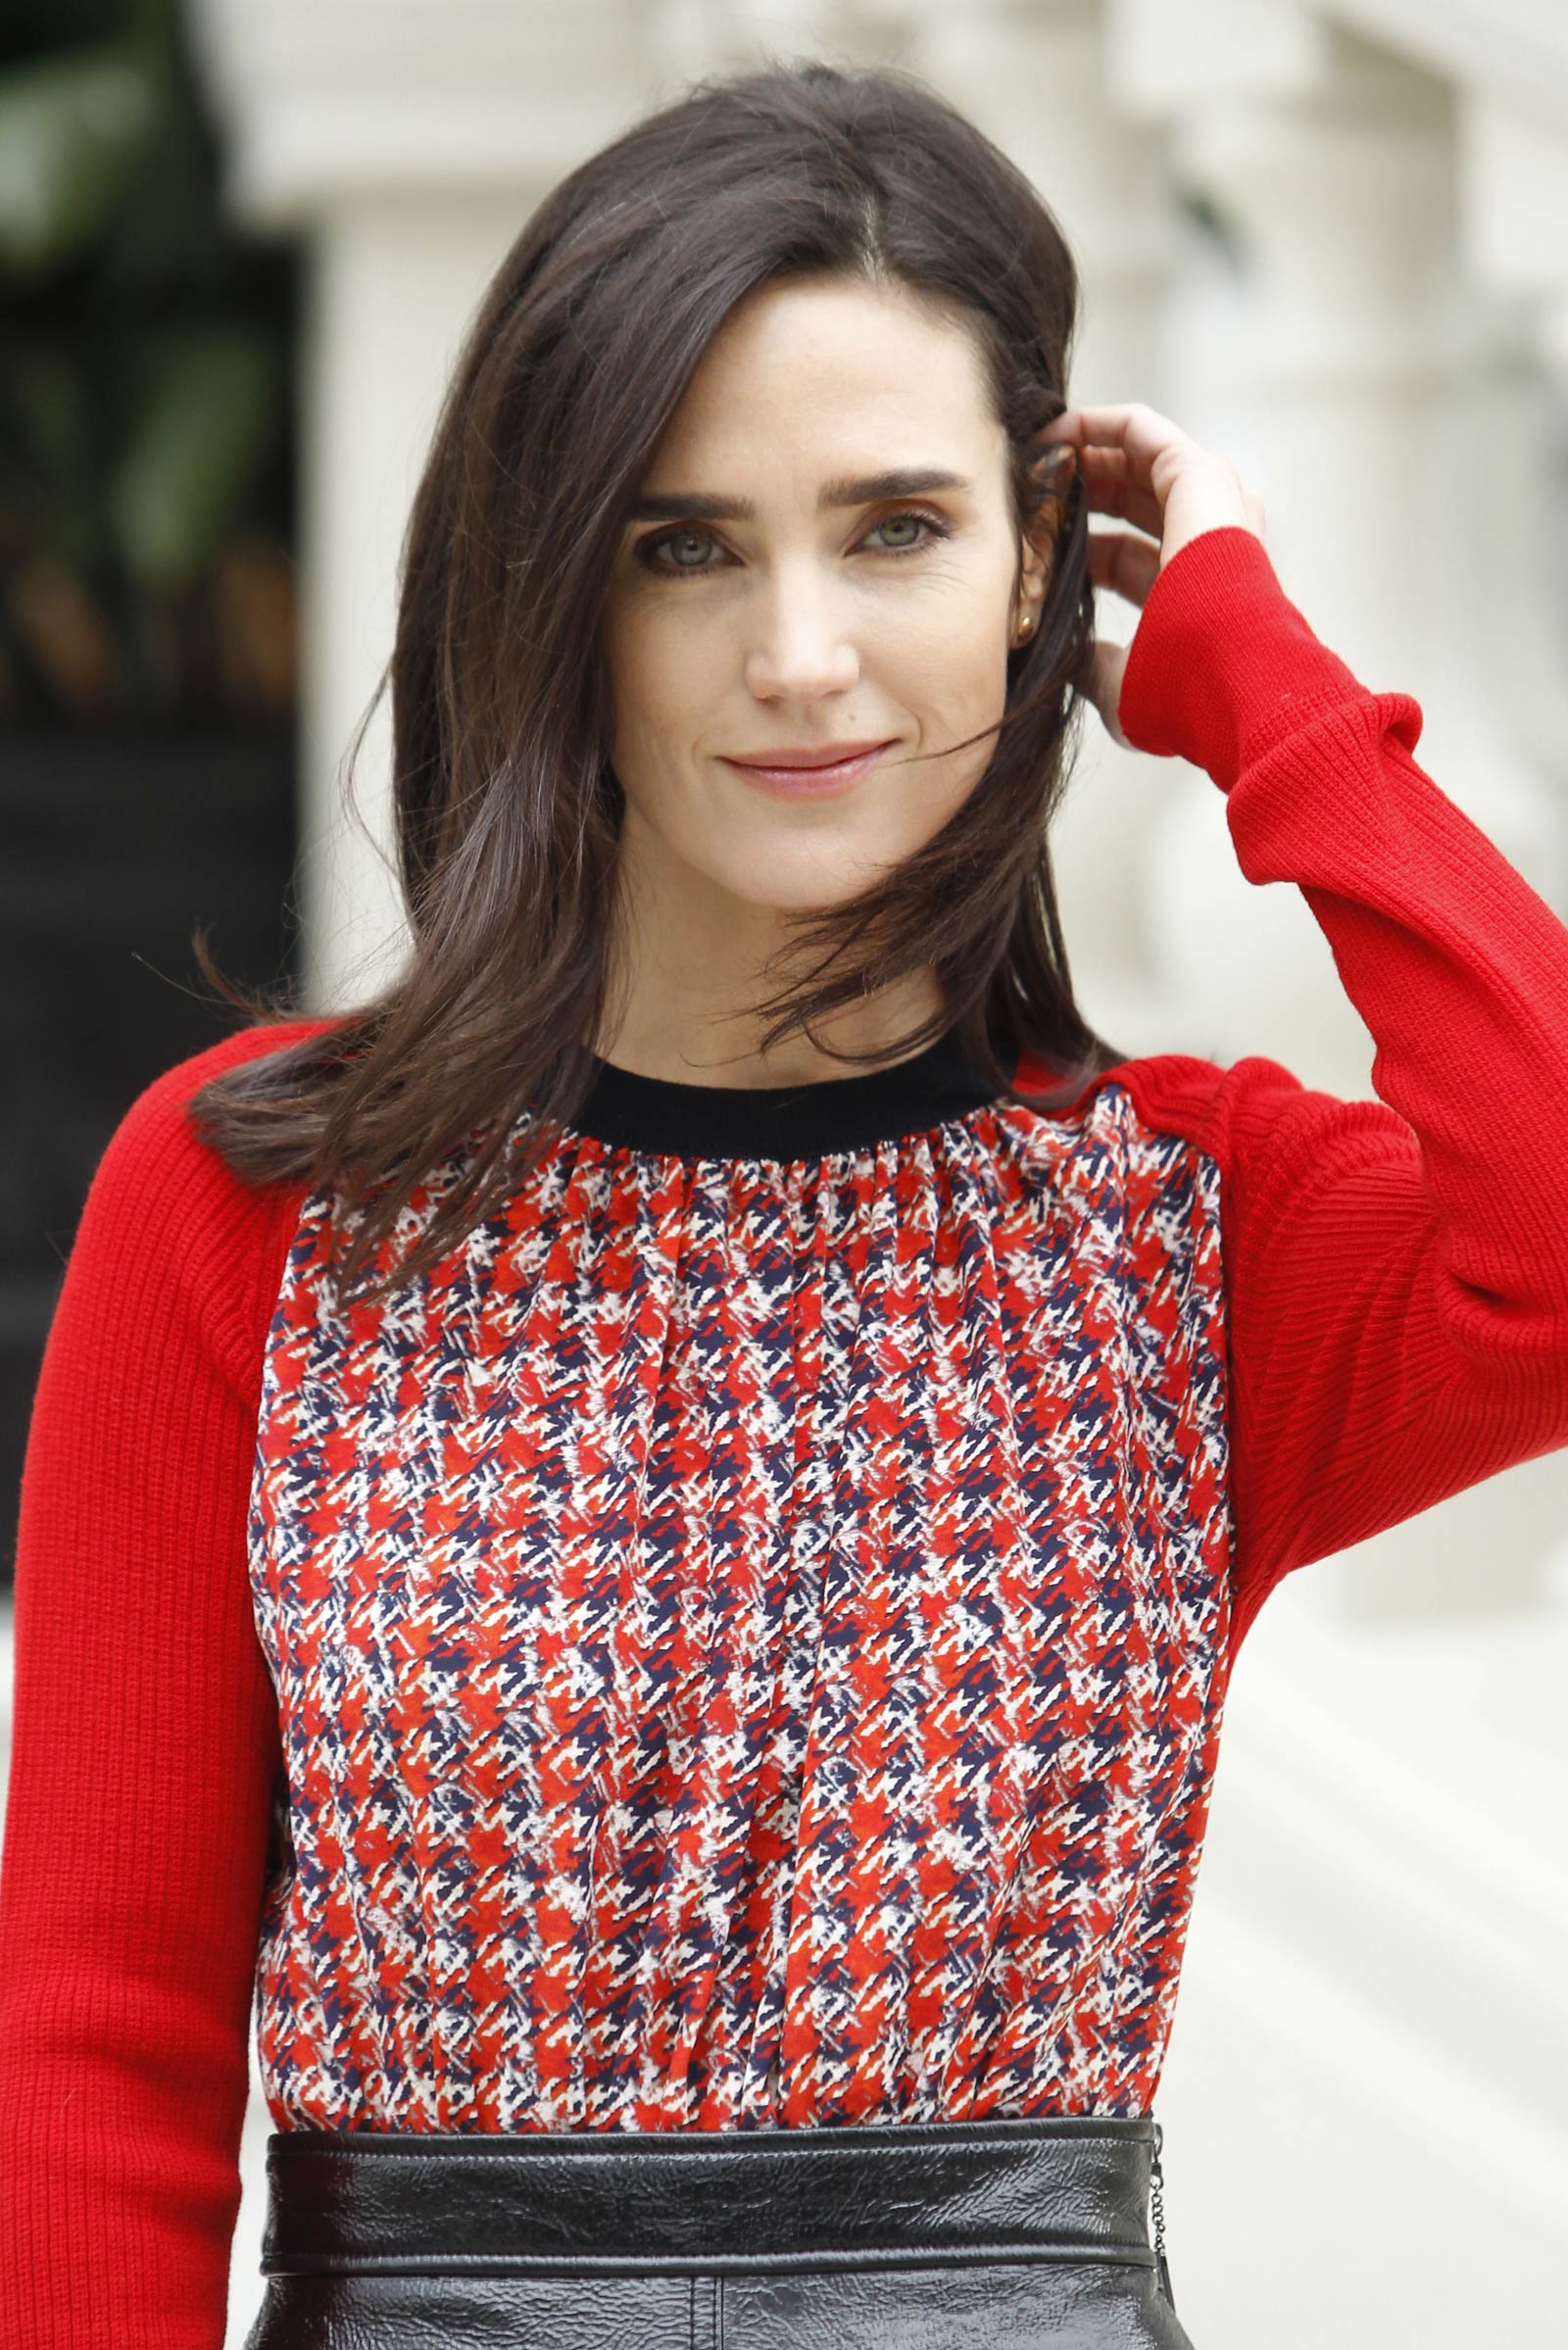 Jennifer Connelly attends Aloft photocall in Madrid